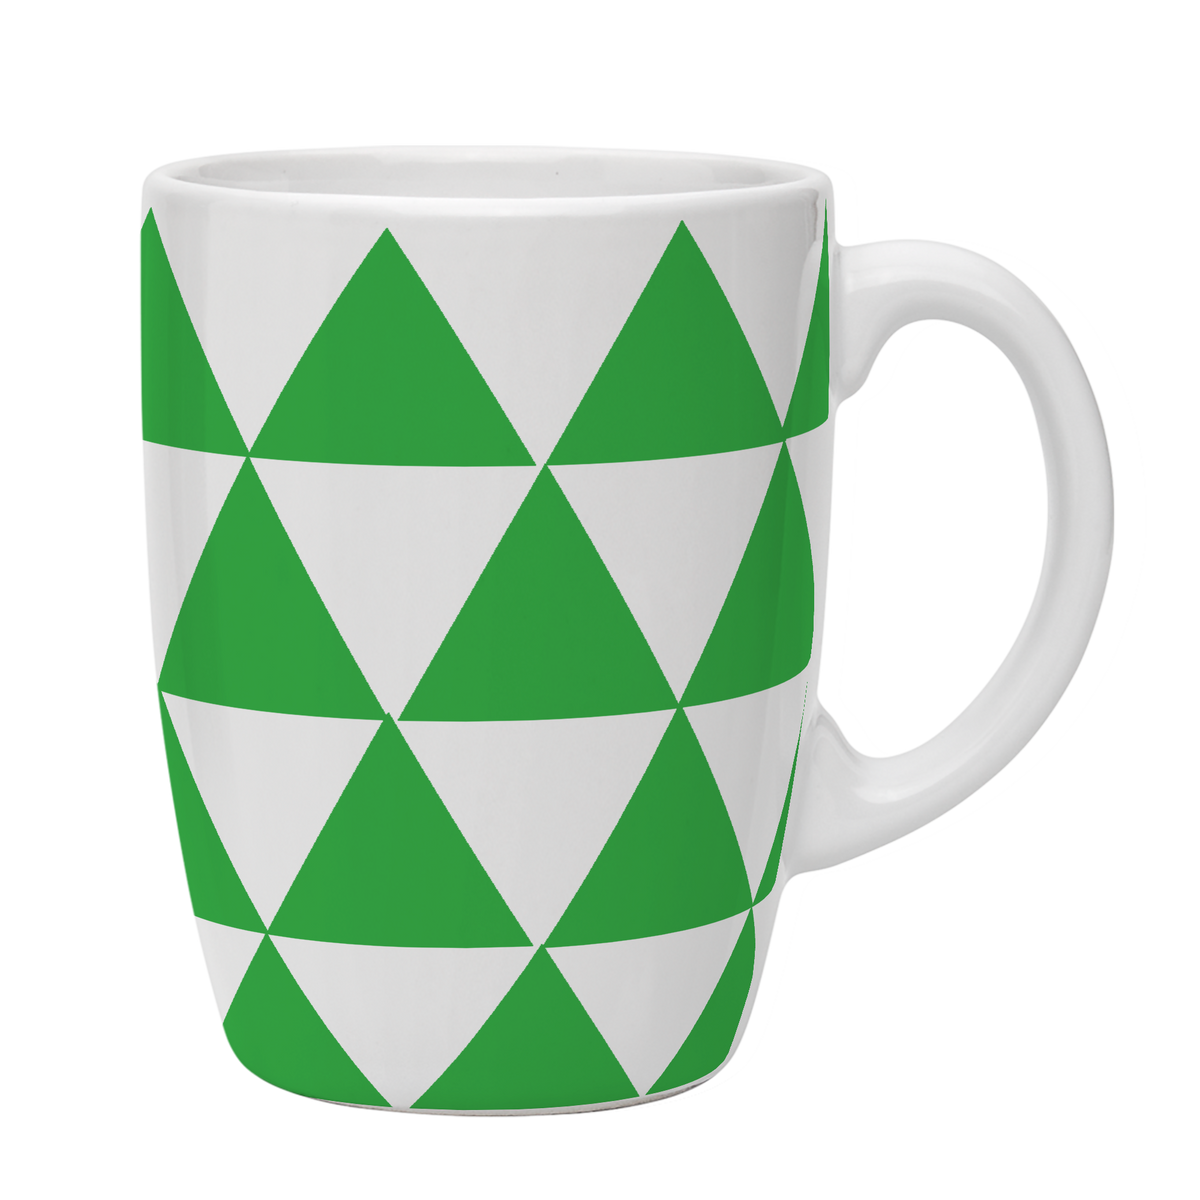 Kates Kitchen gorgeous green triangle mugs are perfect to mix and match to create your own collection.